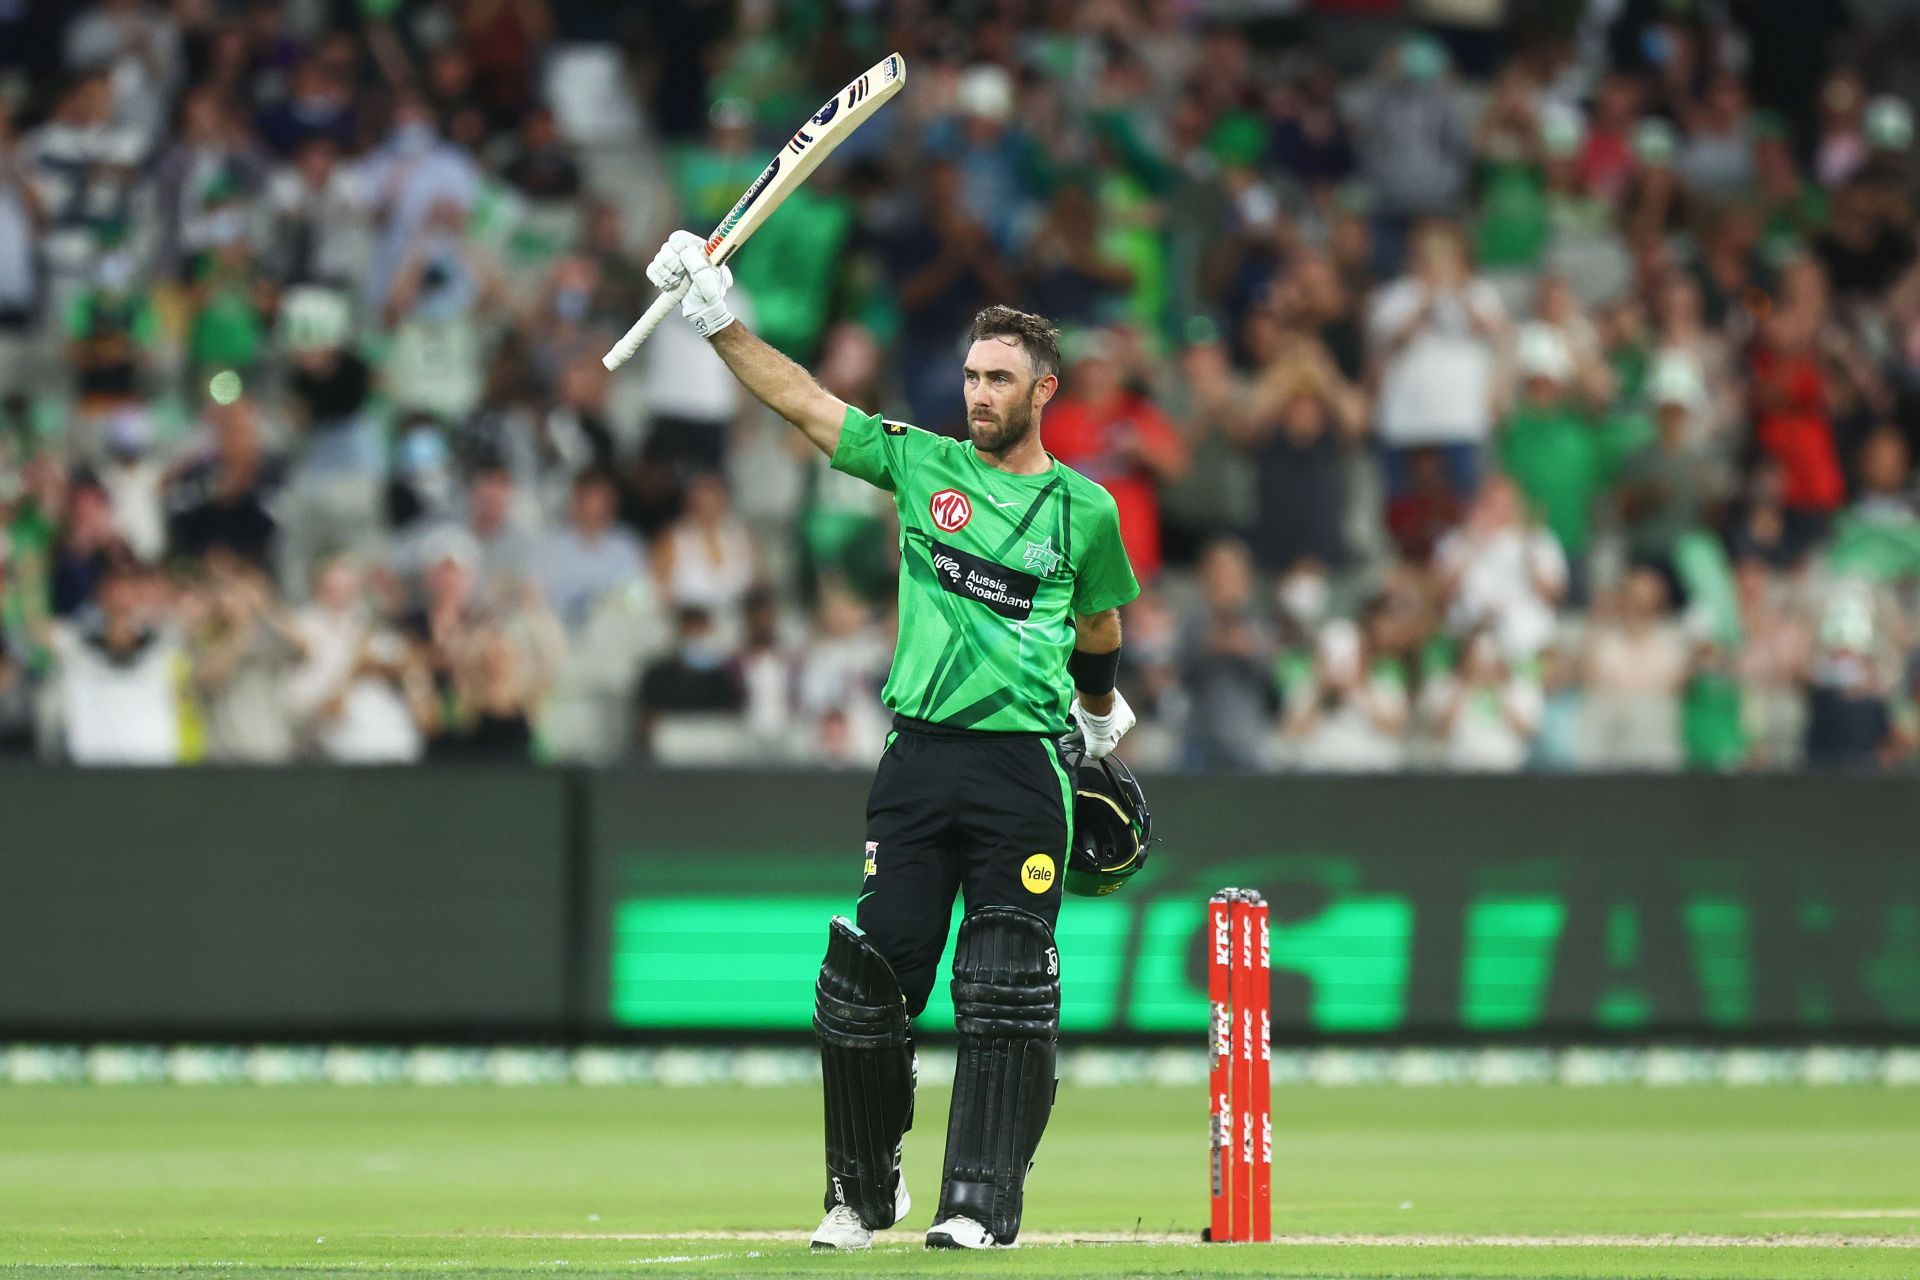 Glenn Maxwell joined Royal Challengers Bangalore last year (Image: Getty).